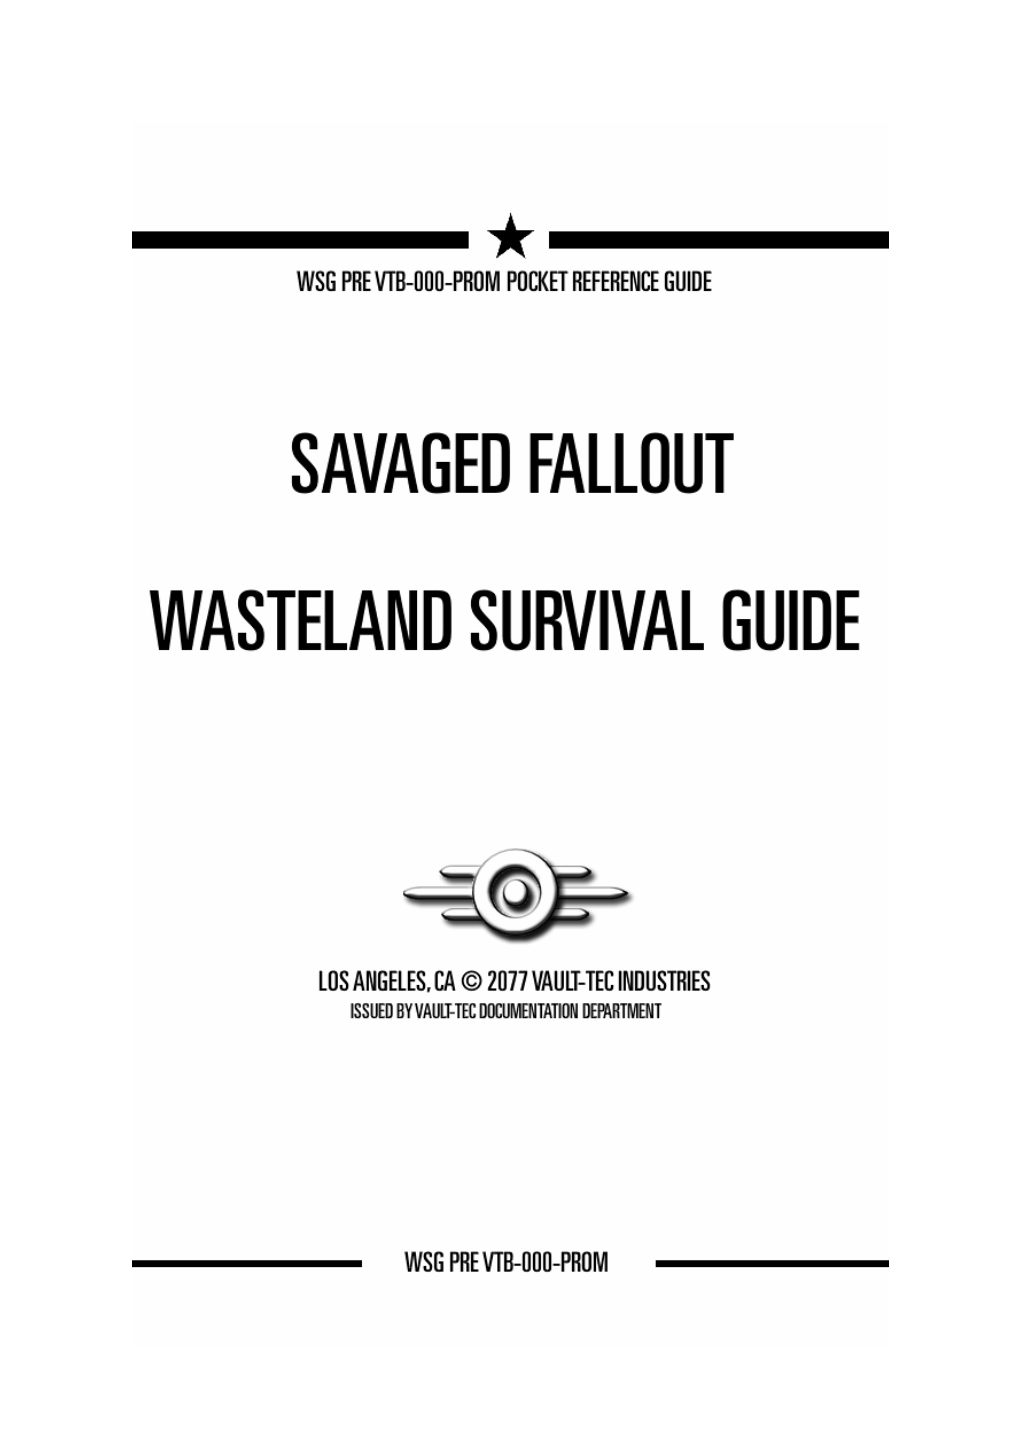 Savaged Fallout Wasteland Survival Guide